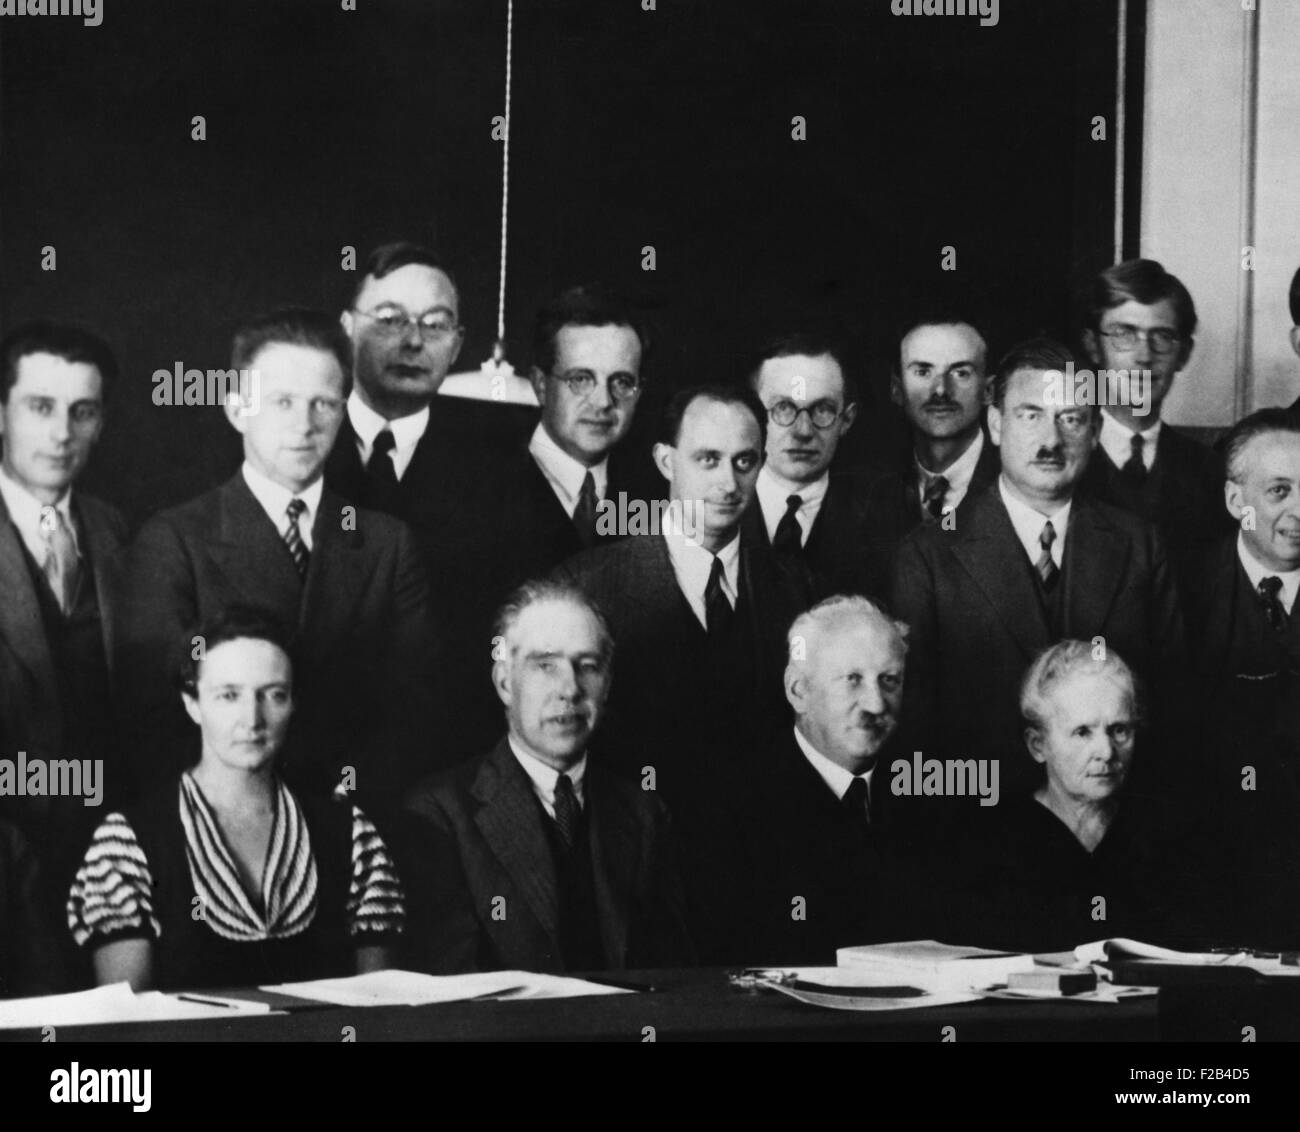 Physicists at the Seventh Solvay Physics Conference, Brussels, Belgium, October 1933. Seated, L-R: Irene Joliot-Curie, Niels Bohr, Abram Ioffe, Marie Curie. Standing, L-R: no ID, Werner Heisenberg, Hendrik Kramers, Ernest Stahel, Enrico Fermi, Ernest Walton, Paul Dirac, Peter Debye, Nevill Mott, Blas Cabrera, Frederic Joliot. - (BSLOC 2015 1 78) Stock Photo